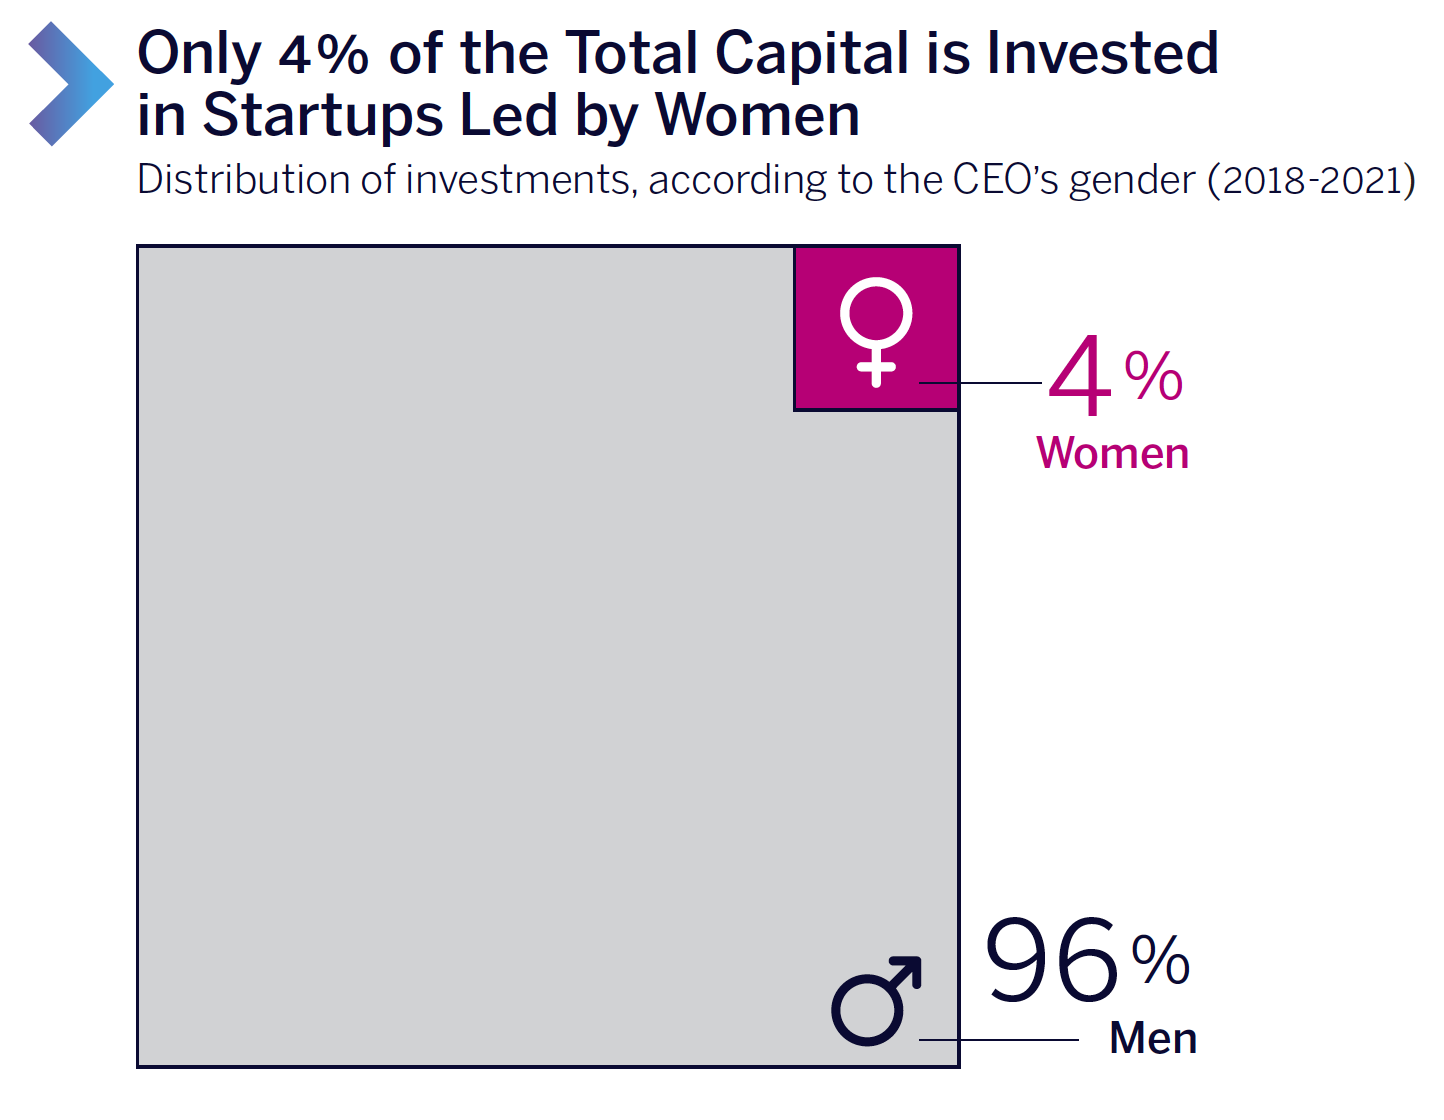 Only 4% of the Total Capital is Invested in Startups Led by Women